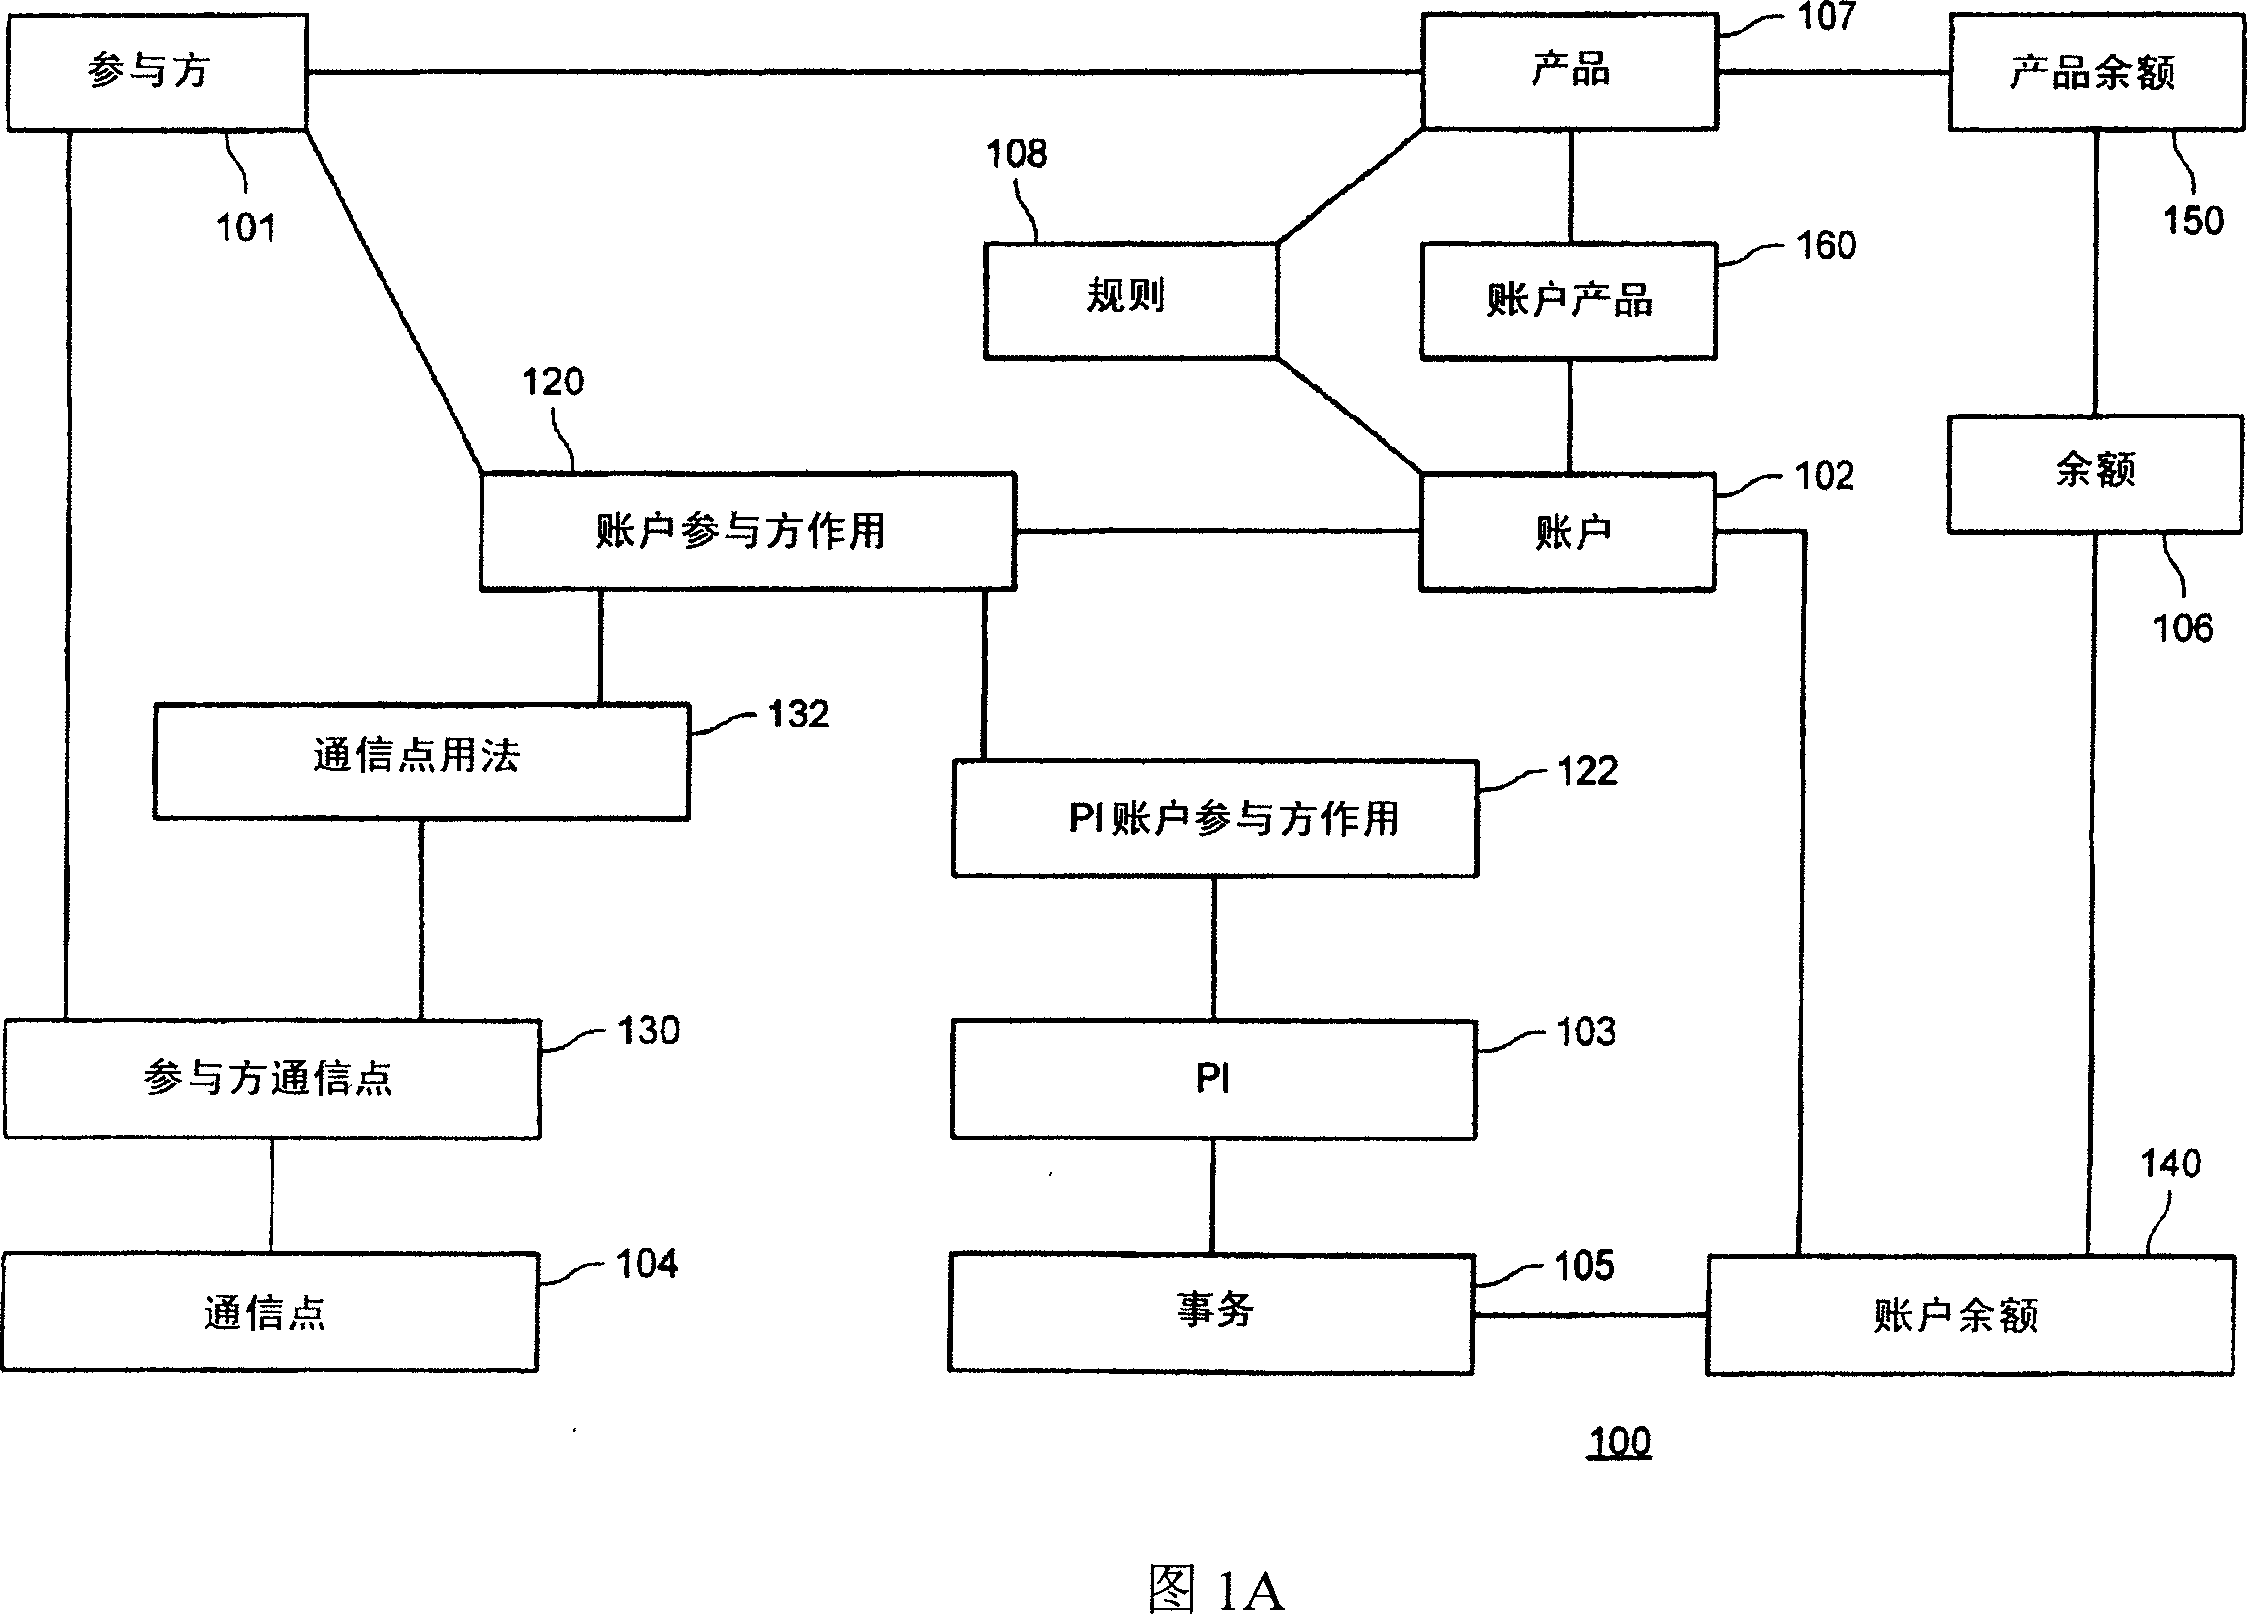 System and methods for transaction processing